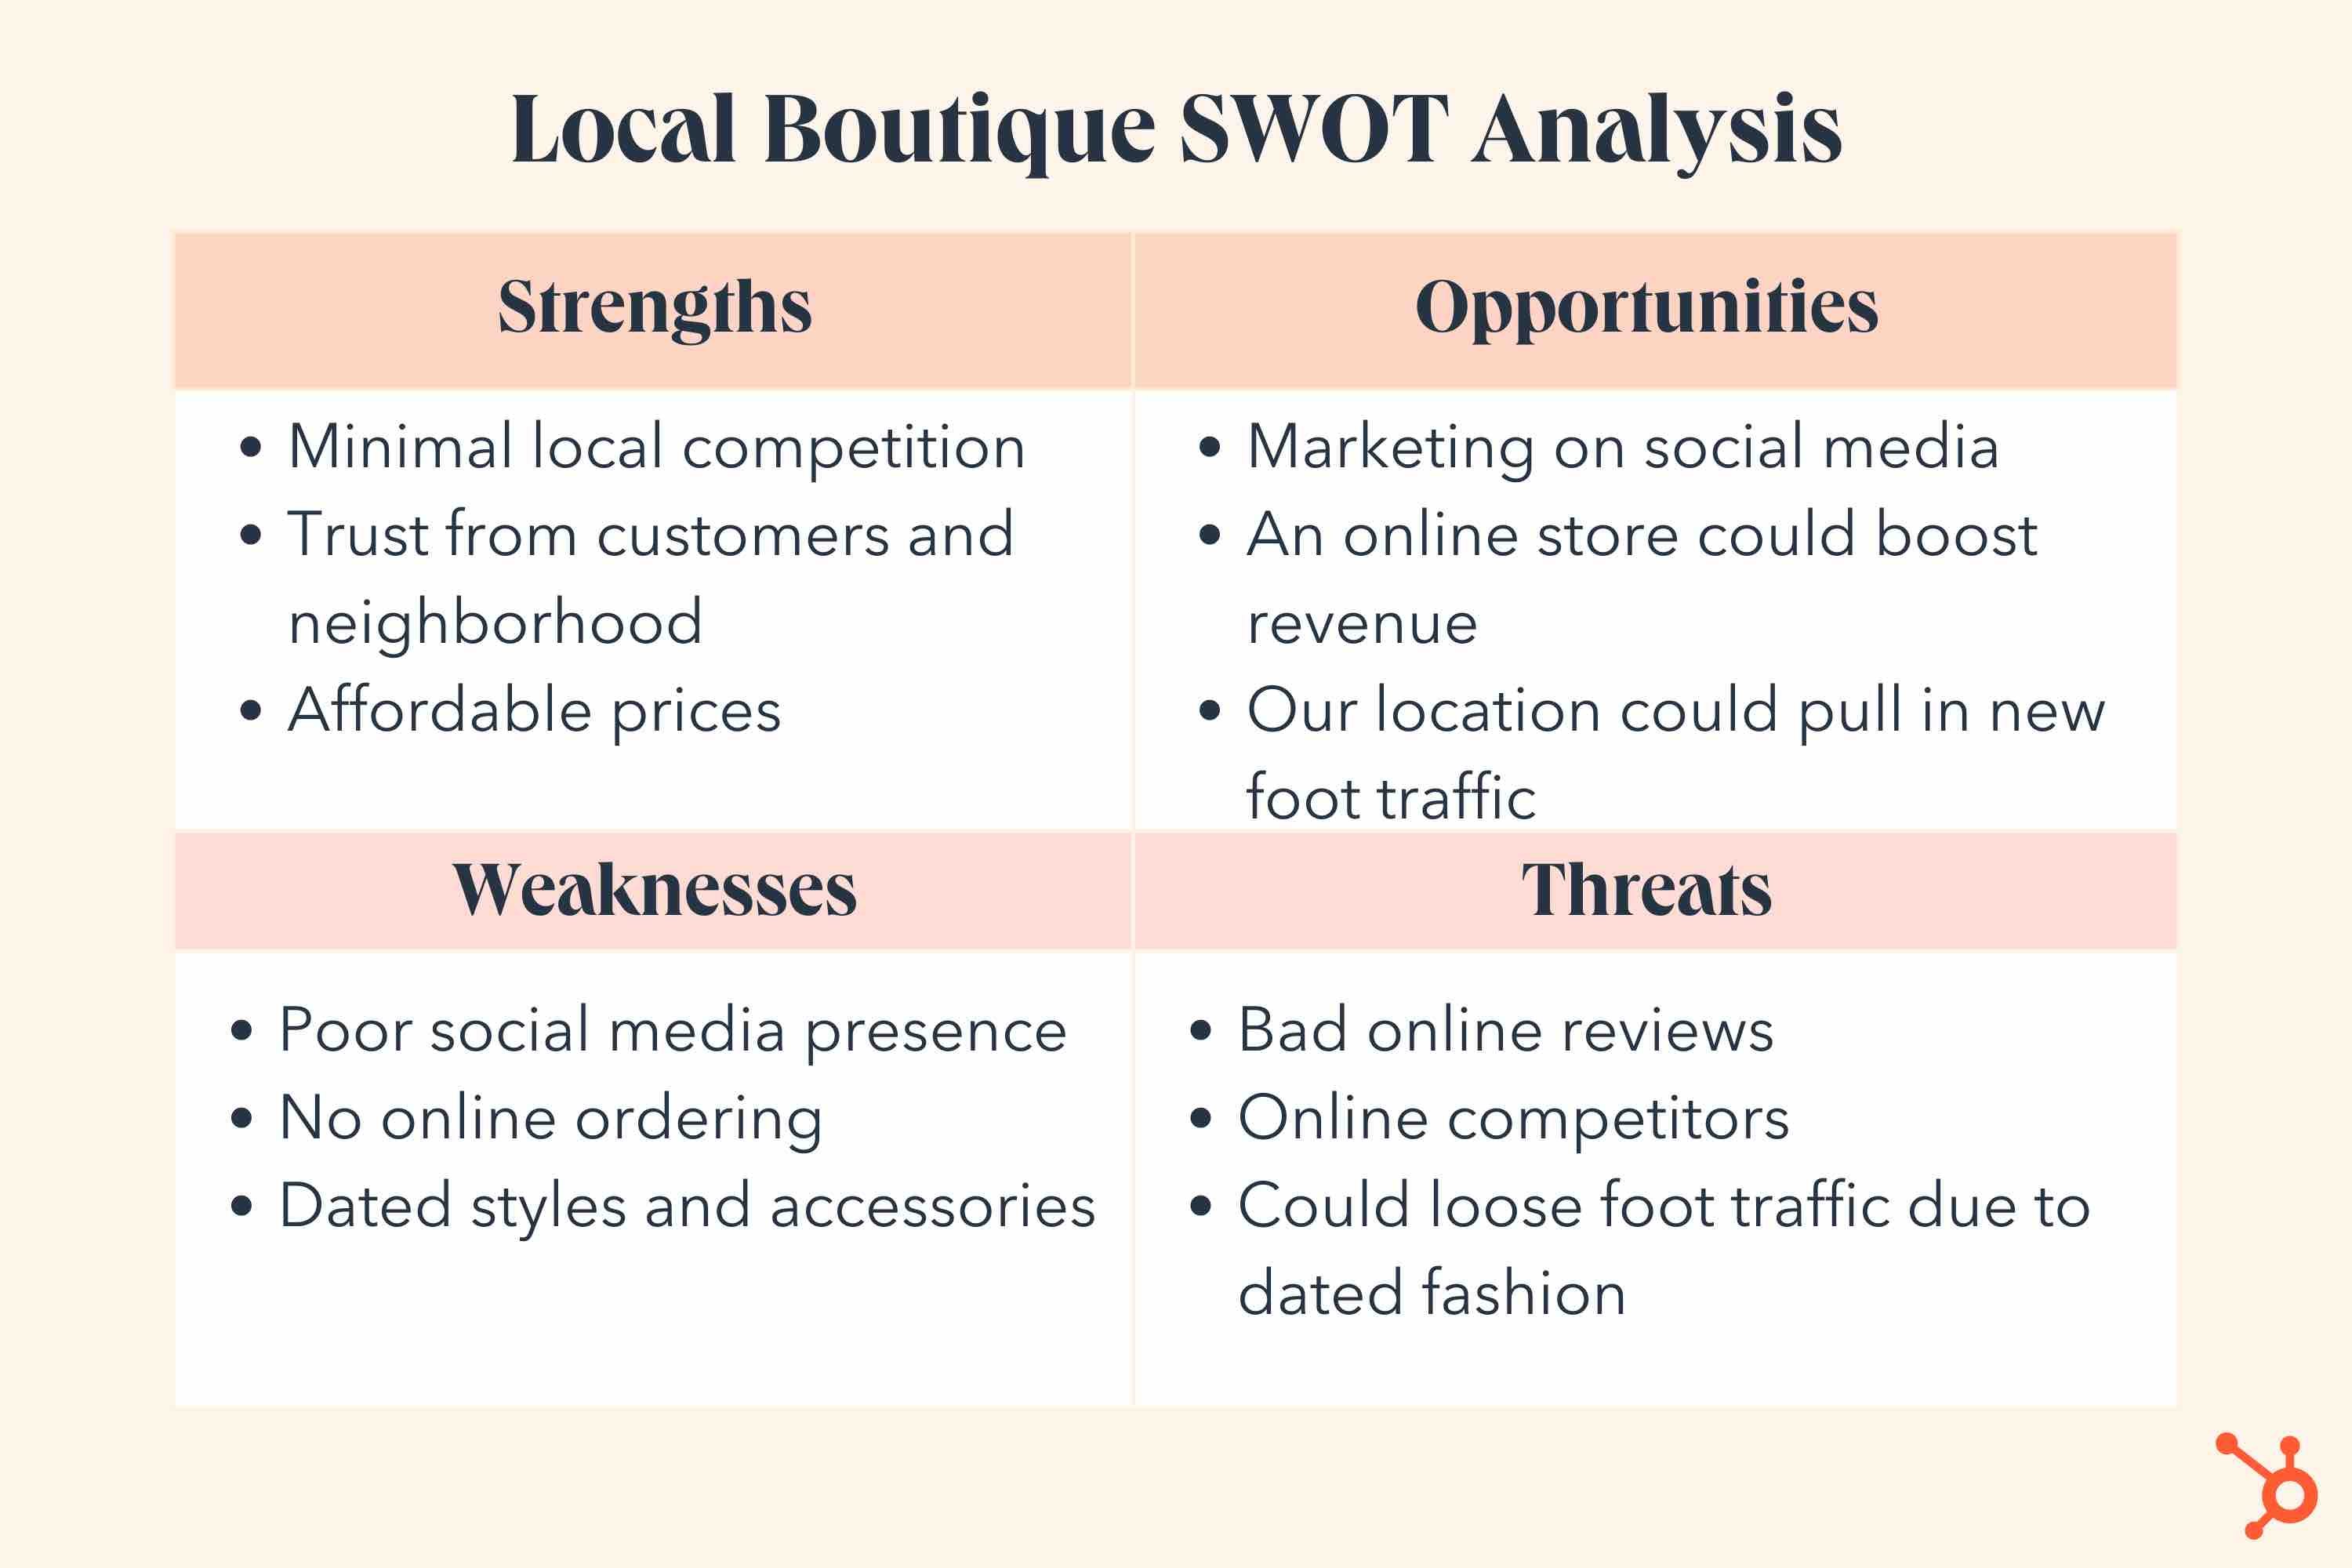 swot analysis Local Boutique.jpg?width=3000&height=2000&name=swot analysis Local Boutique - SWOT Analysis: How To Do One [With Template &amp; Examples]